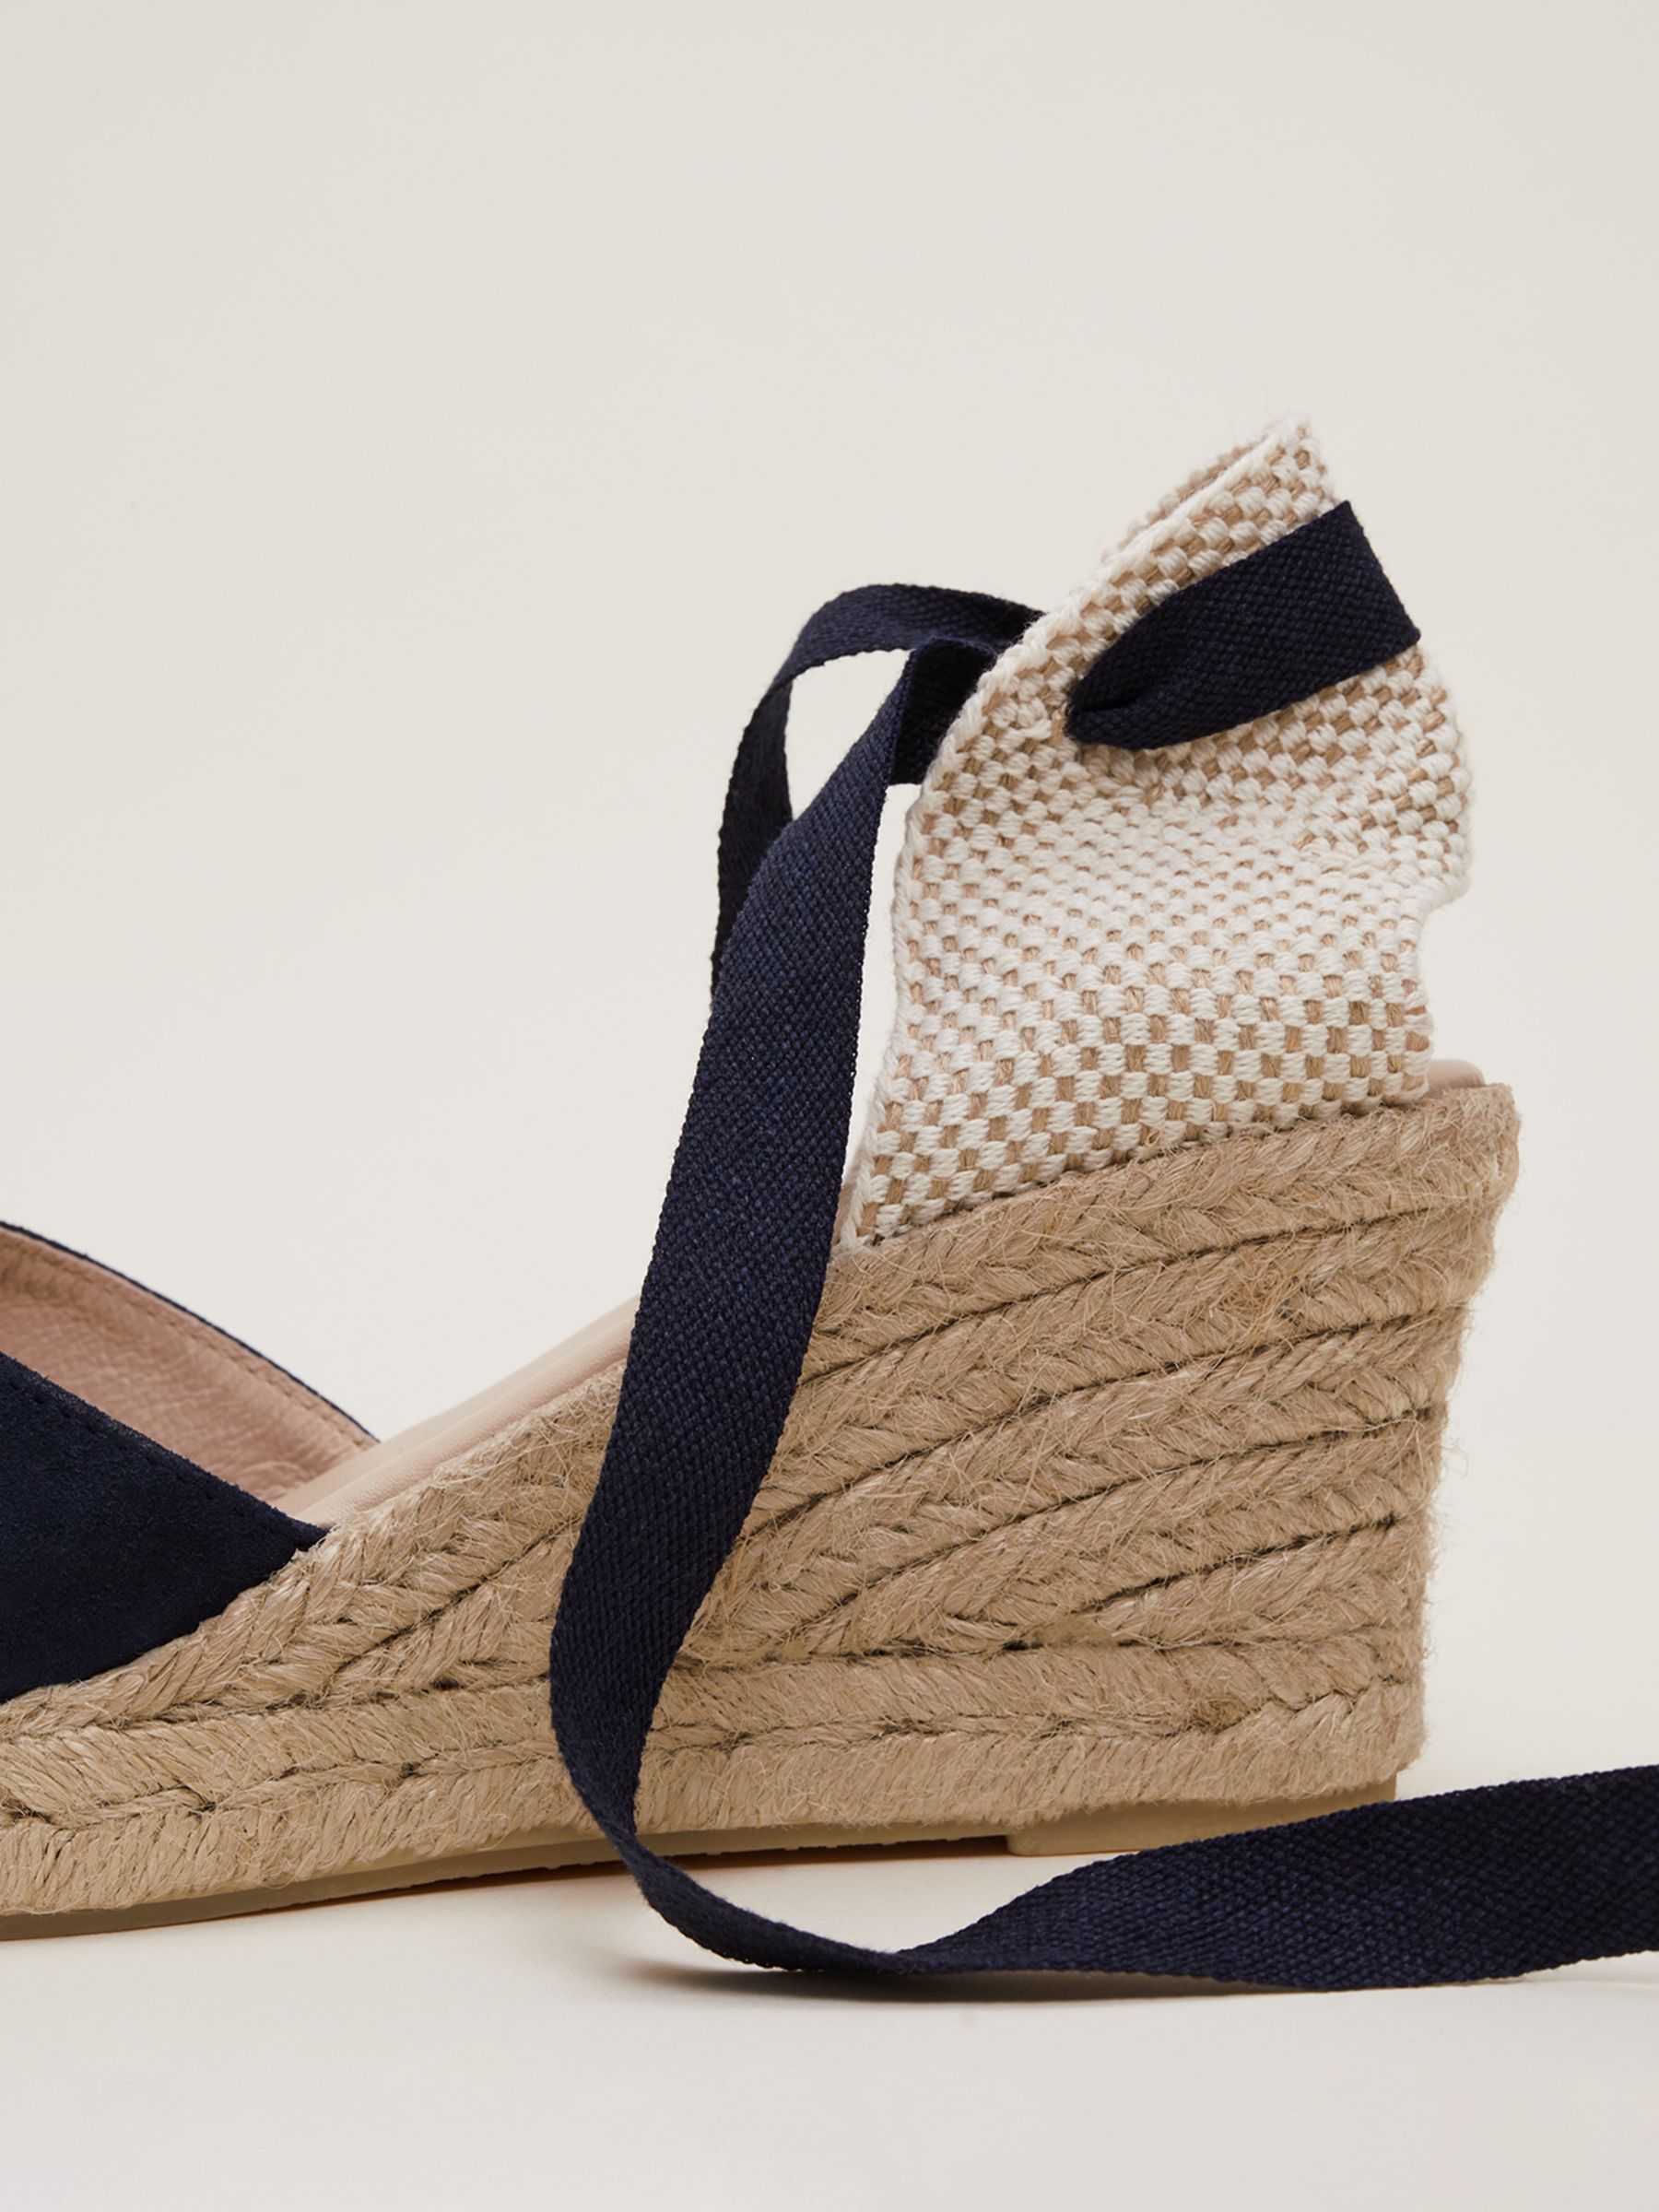 Phase Eight Suede Ankle Tie Espadrilles, Navy, 3